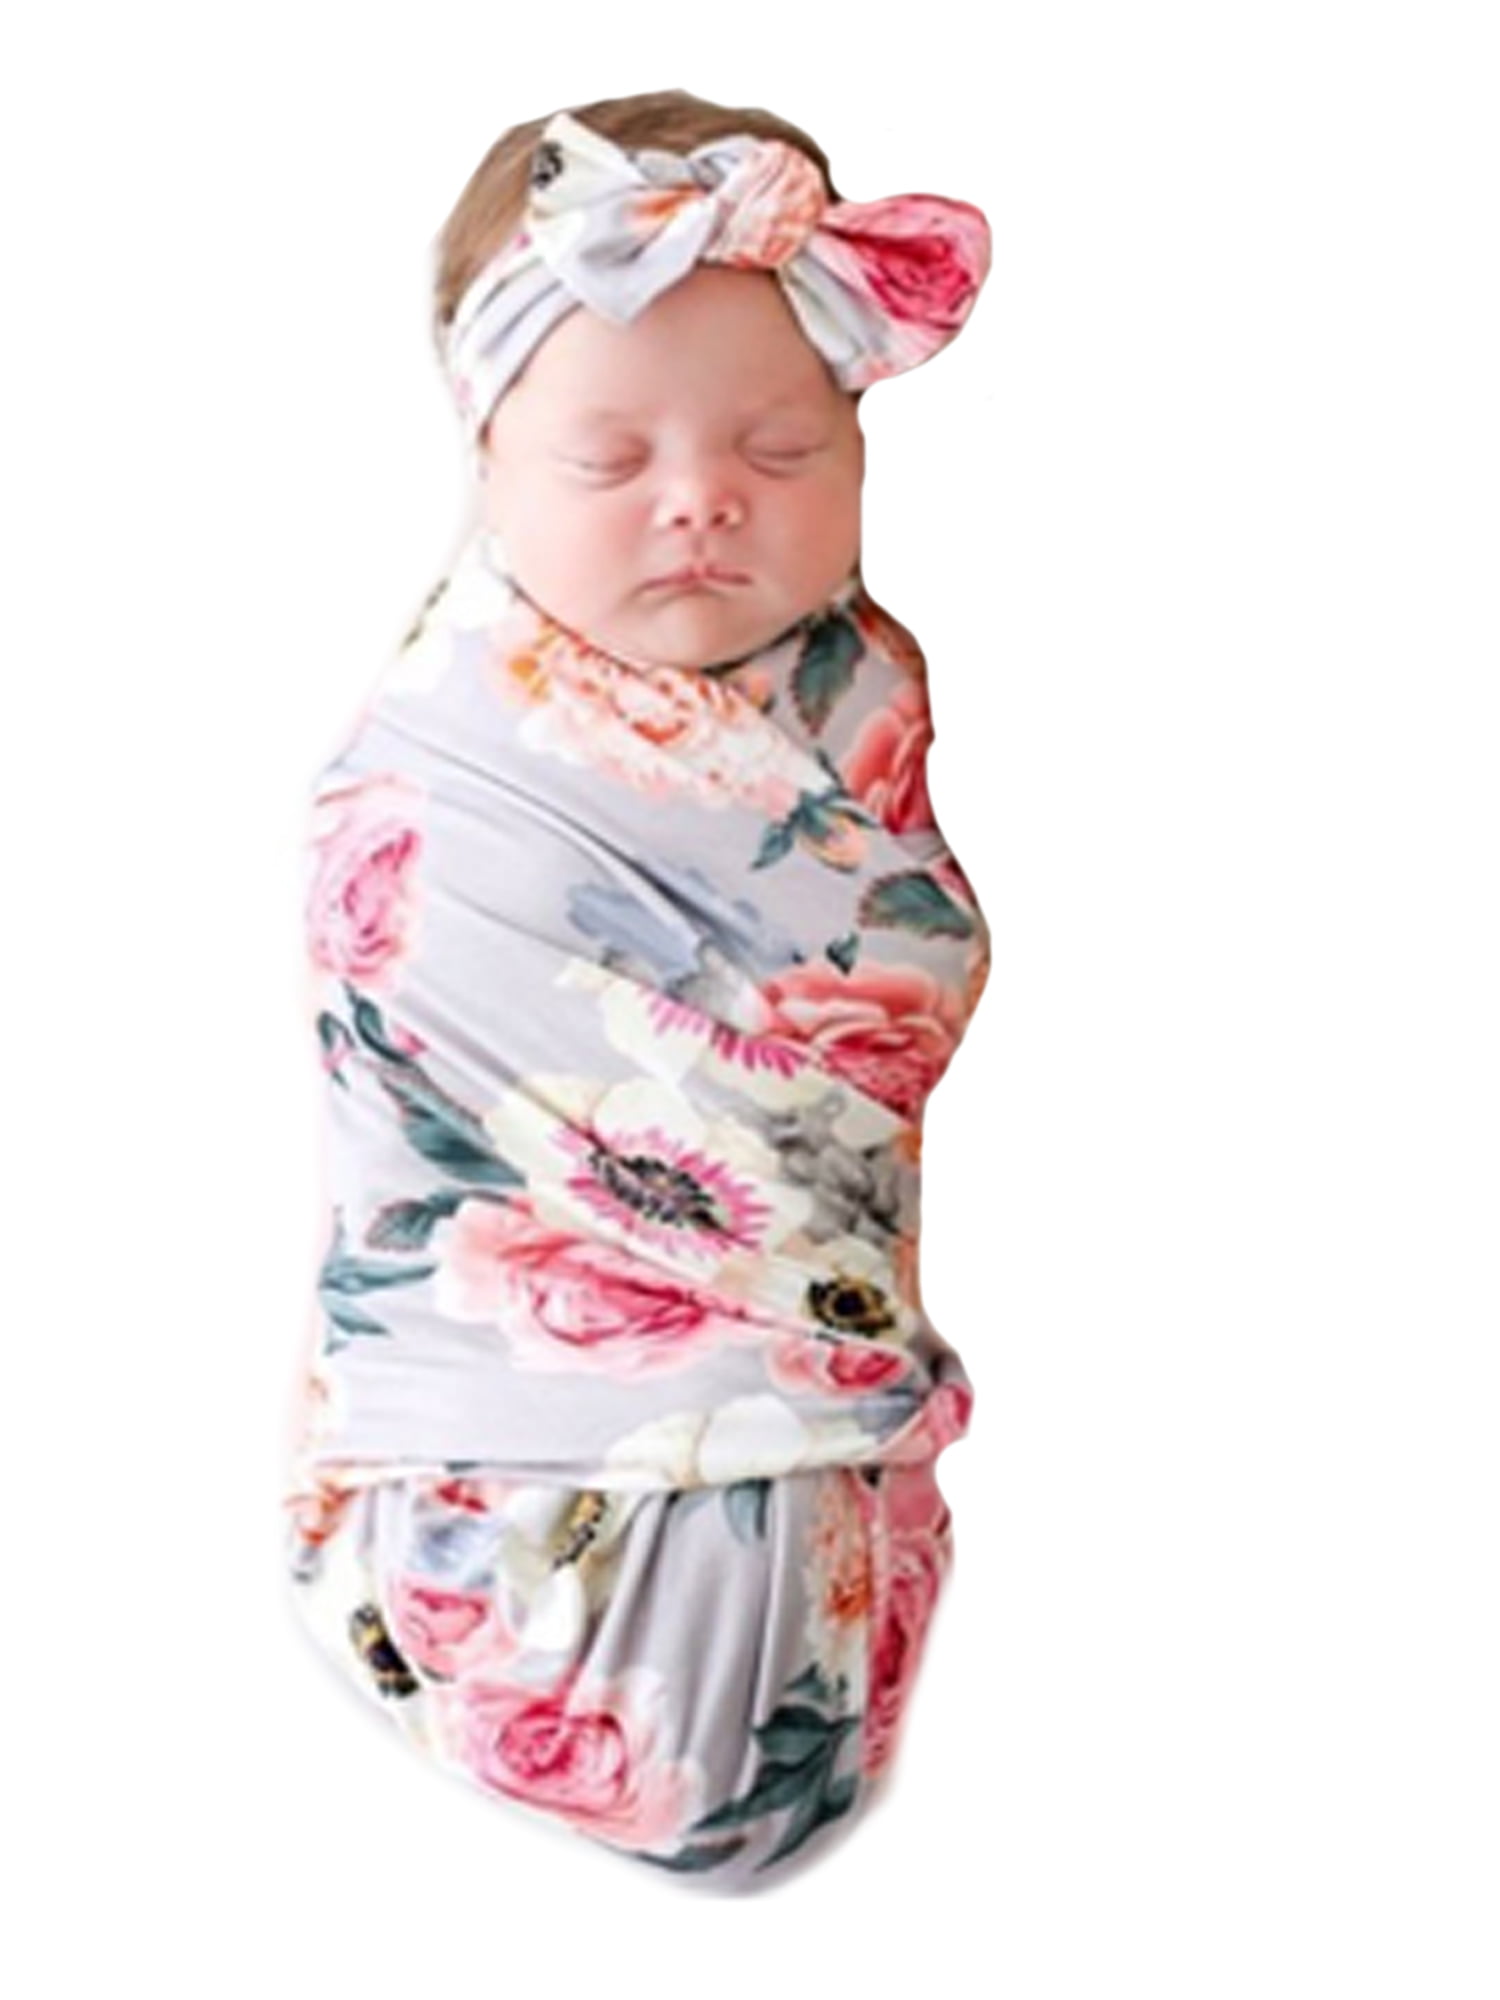 Flower Print Baby Swaddle Cocoon Pack B Sleep Receiving Blankets Cotton Nursery Swaddle and Hair Band Set 3 Pack for Photograph Newborn Receiving Blanket Headband Set